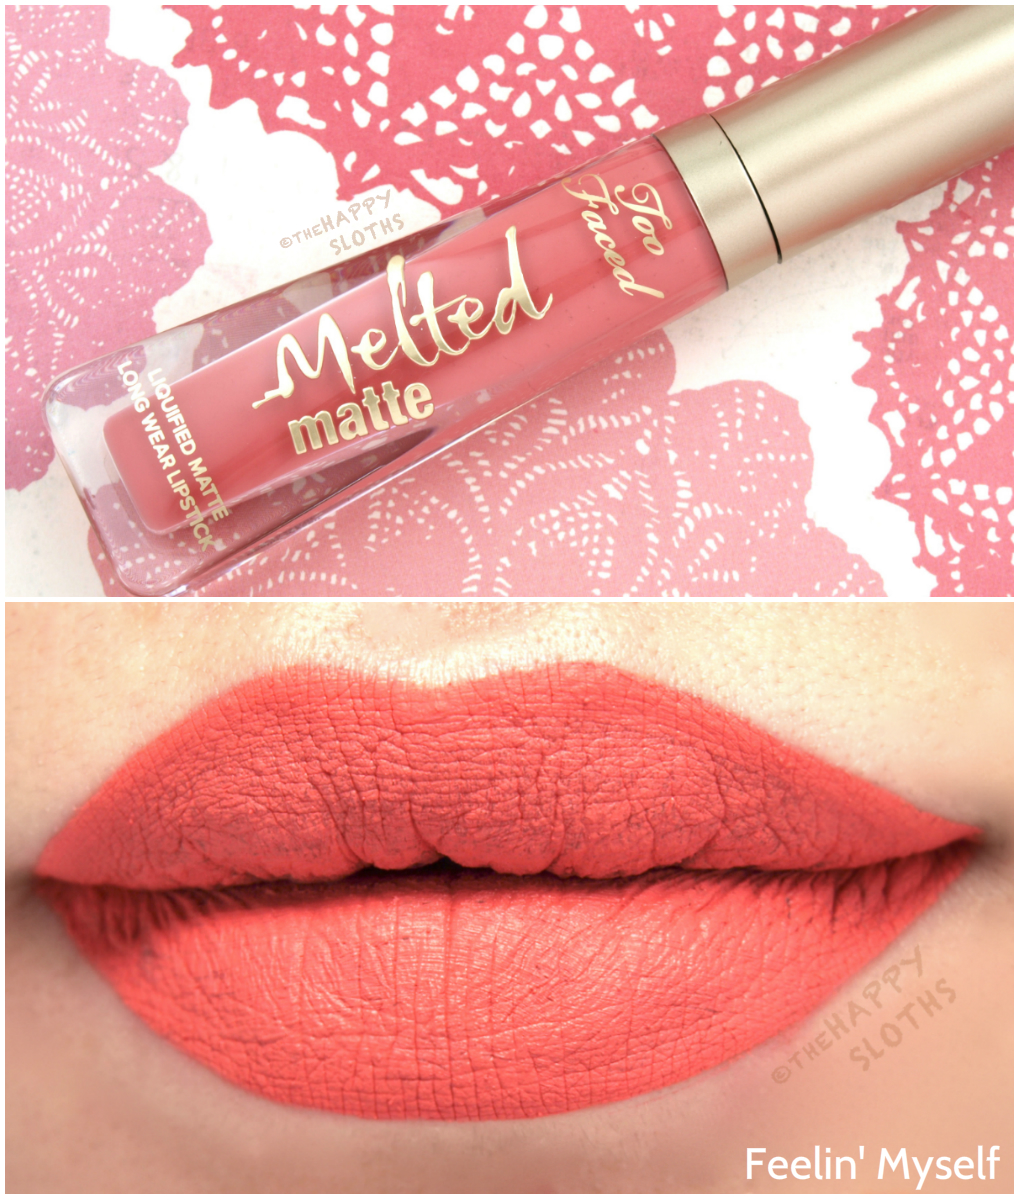 Onhandig Sanders geweld Too Faced Melted Matte Liquified Matte Long Wear Lipstick in "It's  Happening" & "Feelin' Myself": Review and Swatches | The Happy Sloths:  Beauty, Makeup, and Skincare Blog with Reviews and Swatches